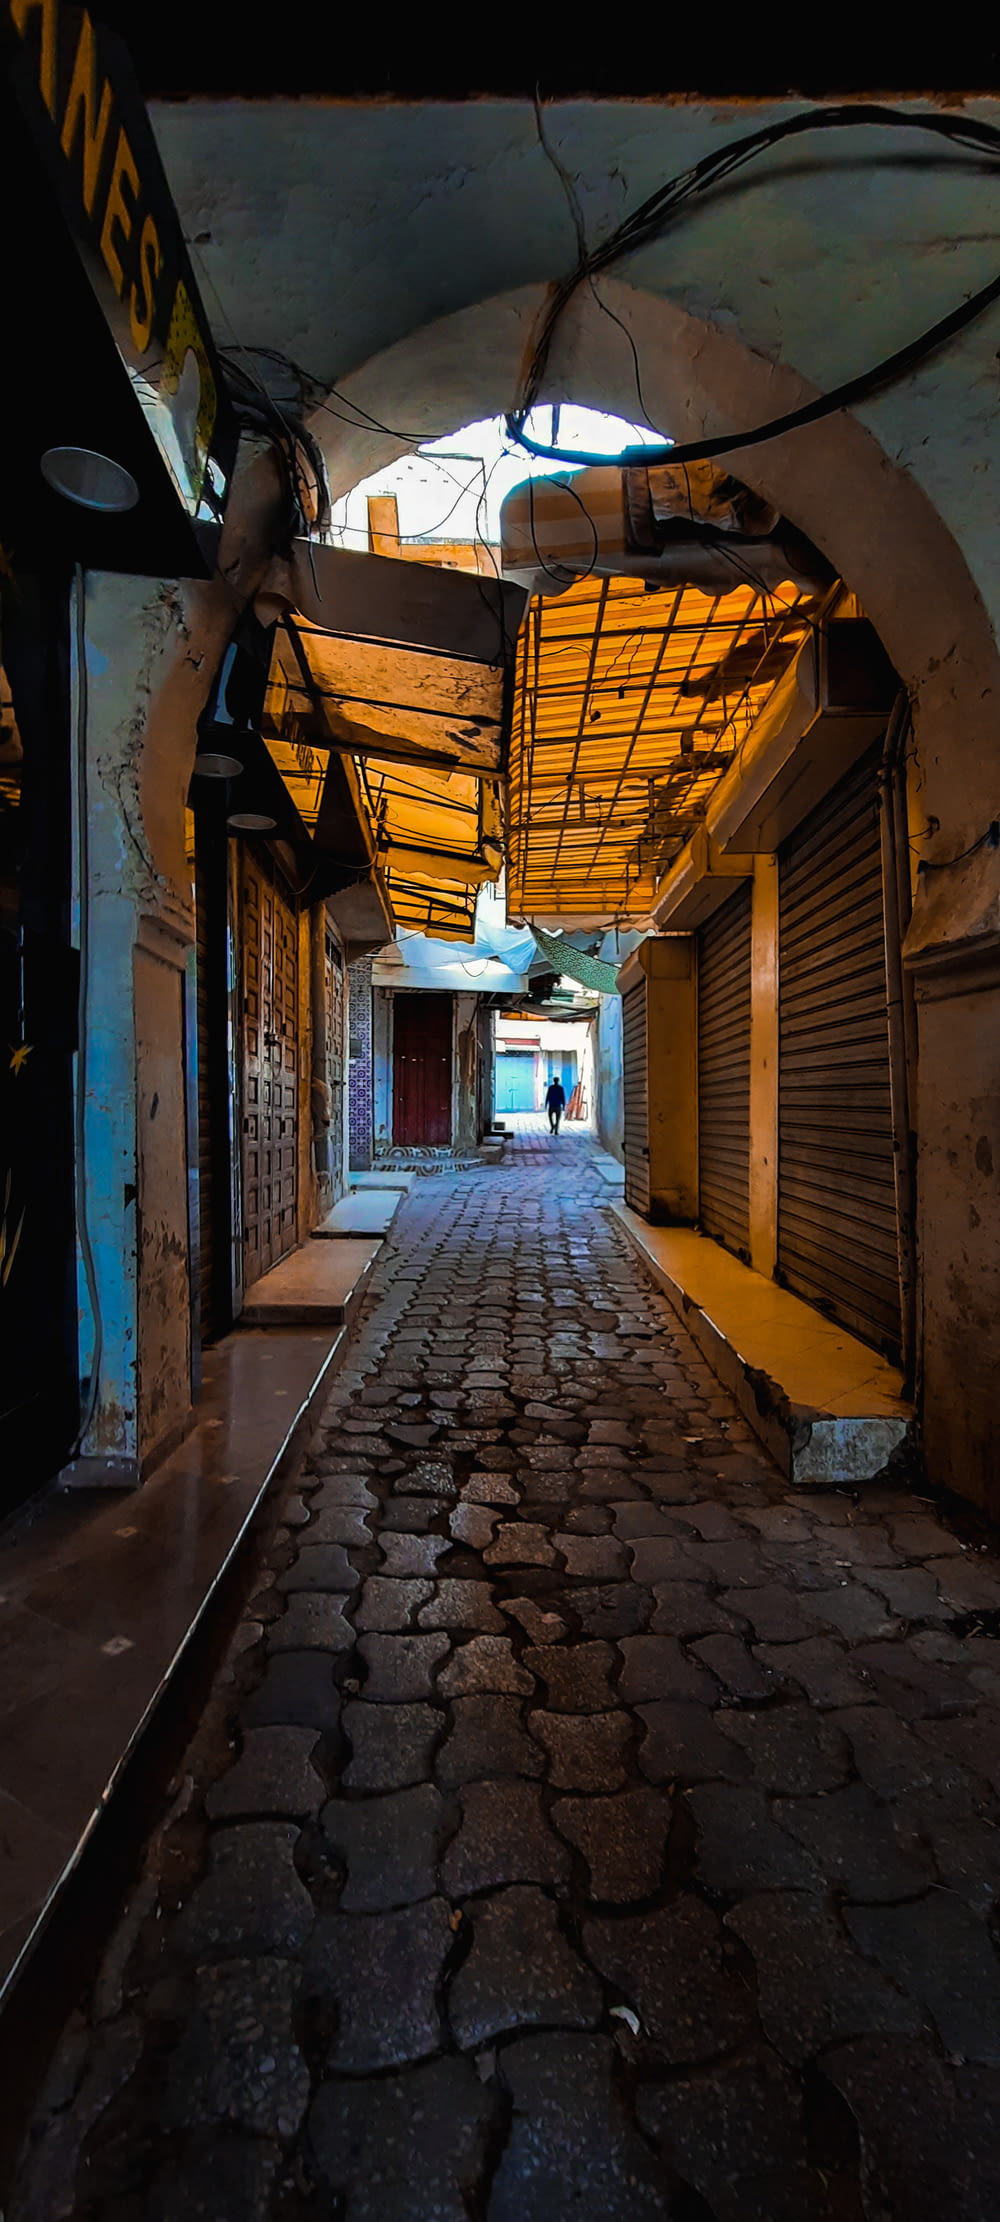 an alley way with a person walking down it